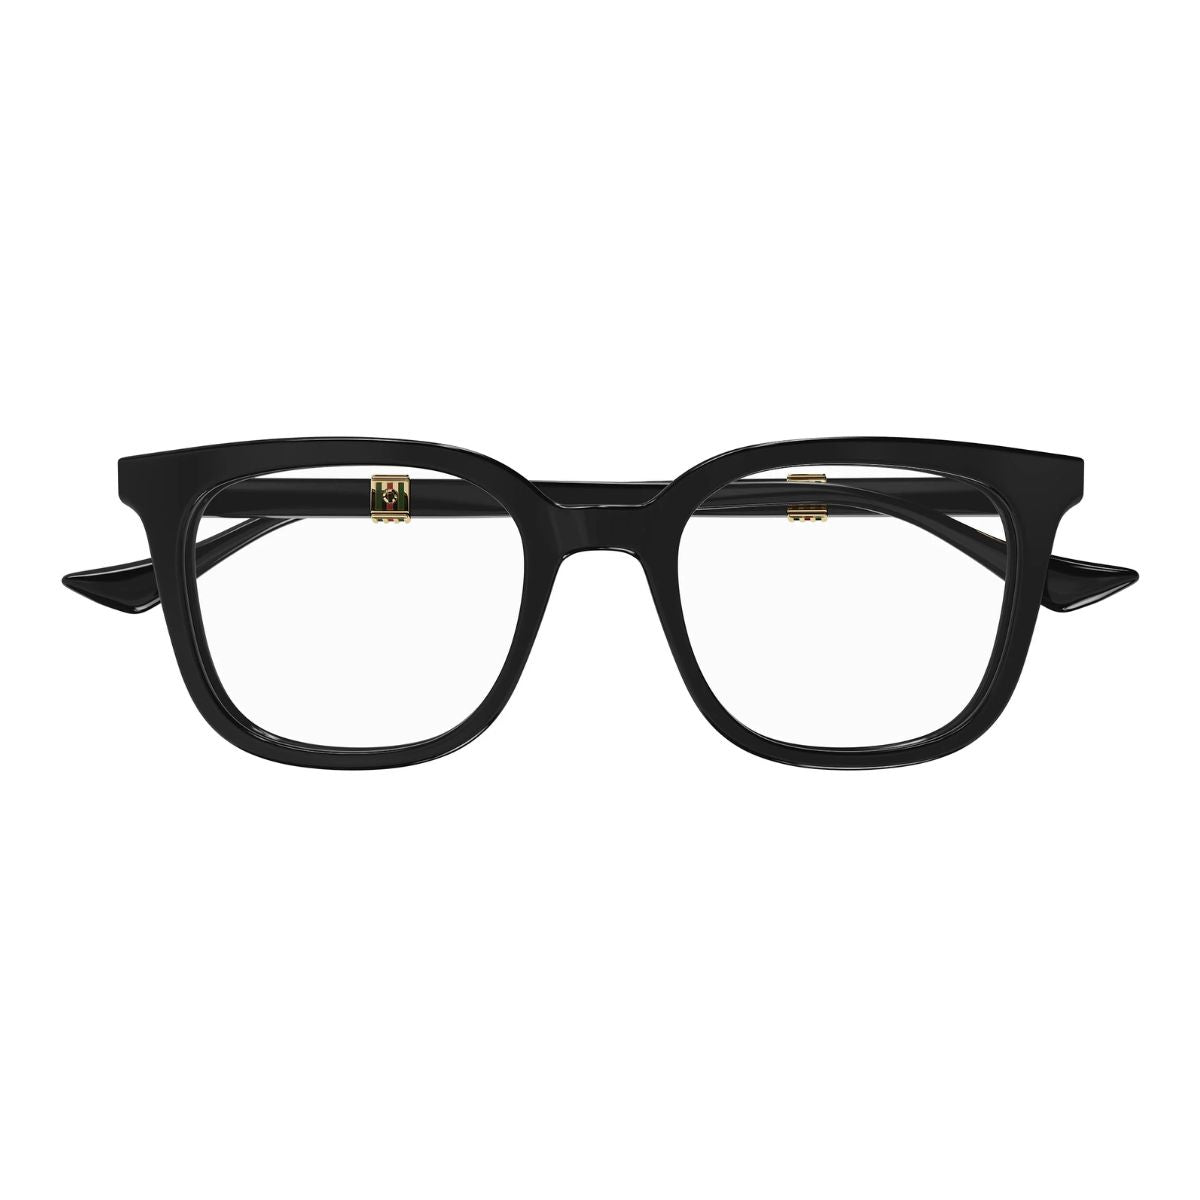 "Gucci 1479O 001 Frames - Explore the Latest Eyewear Trends at Optorium"